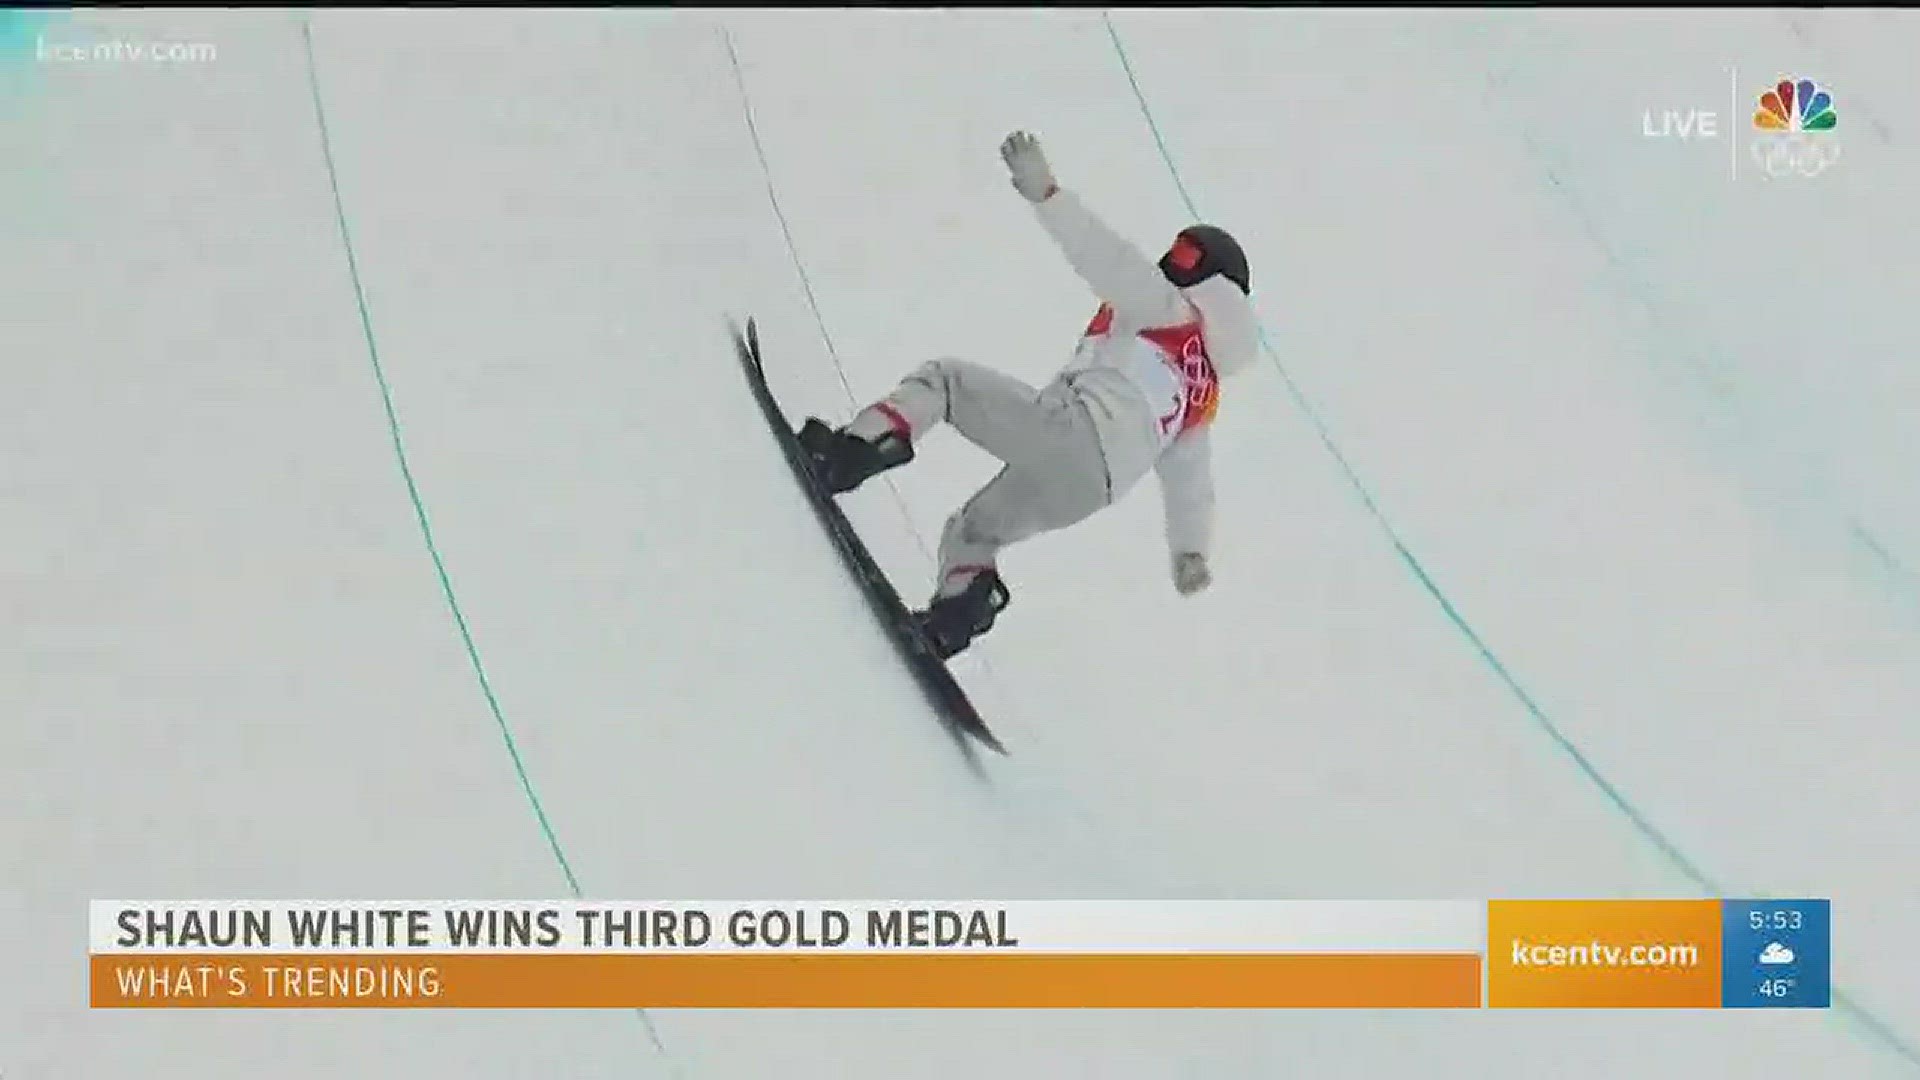 Shaun White wins gold and Michael Phelps new dad.